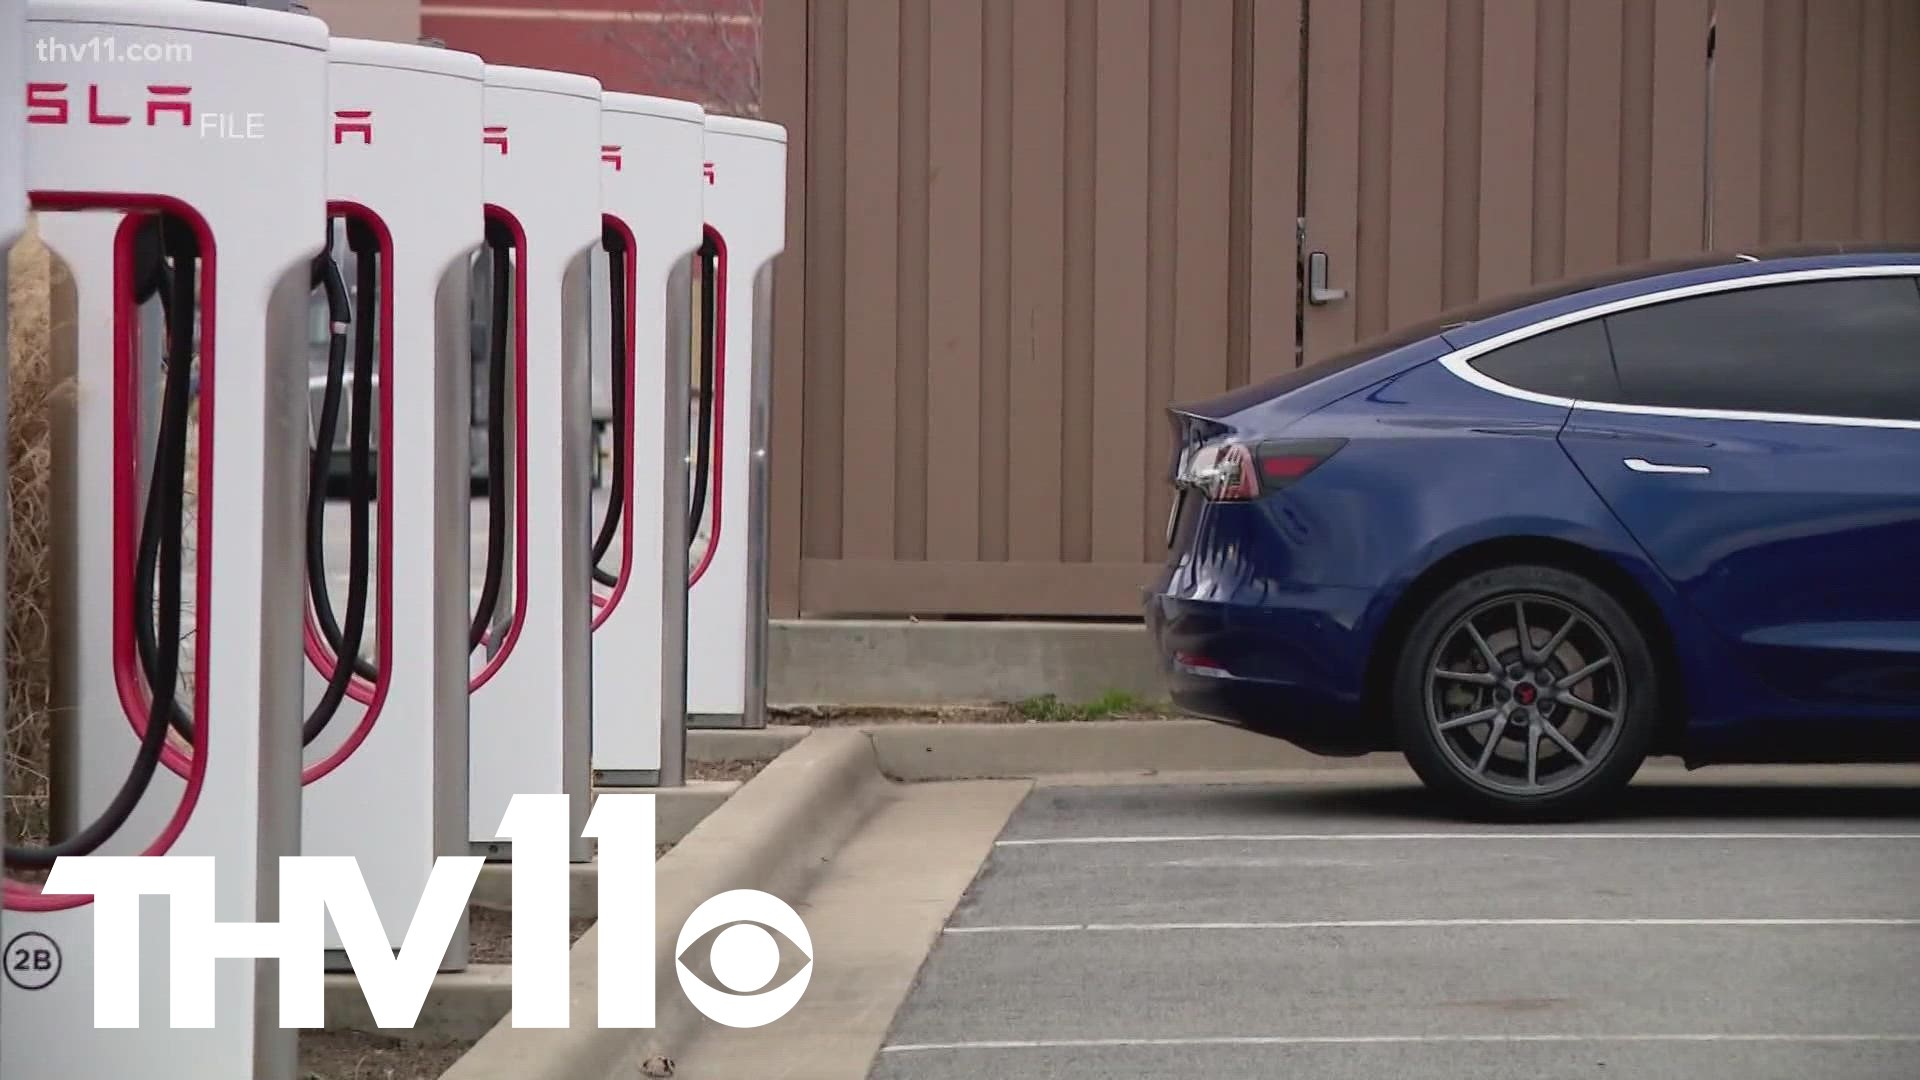 Over the next 5 years, Arkansas will add an electric vehicle charging station every 50 miles near an interstate exit to help people who are travelling long distance.